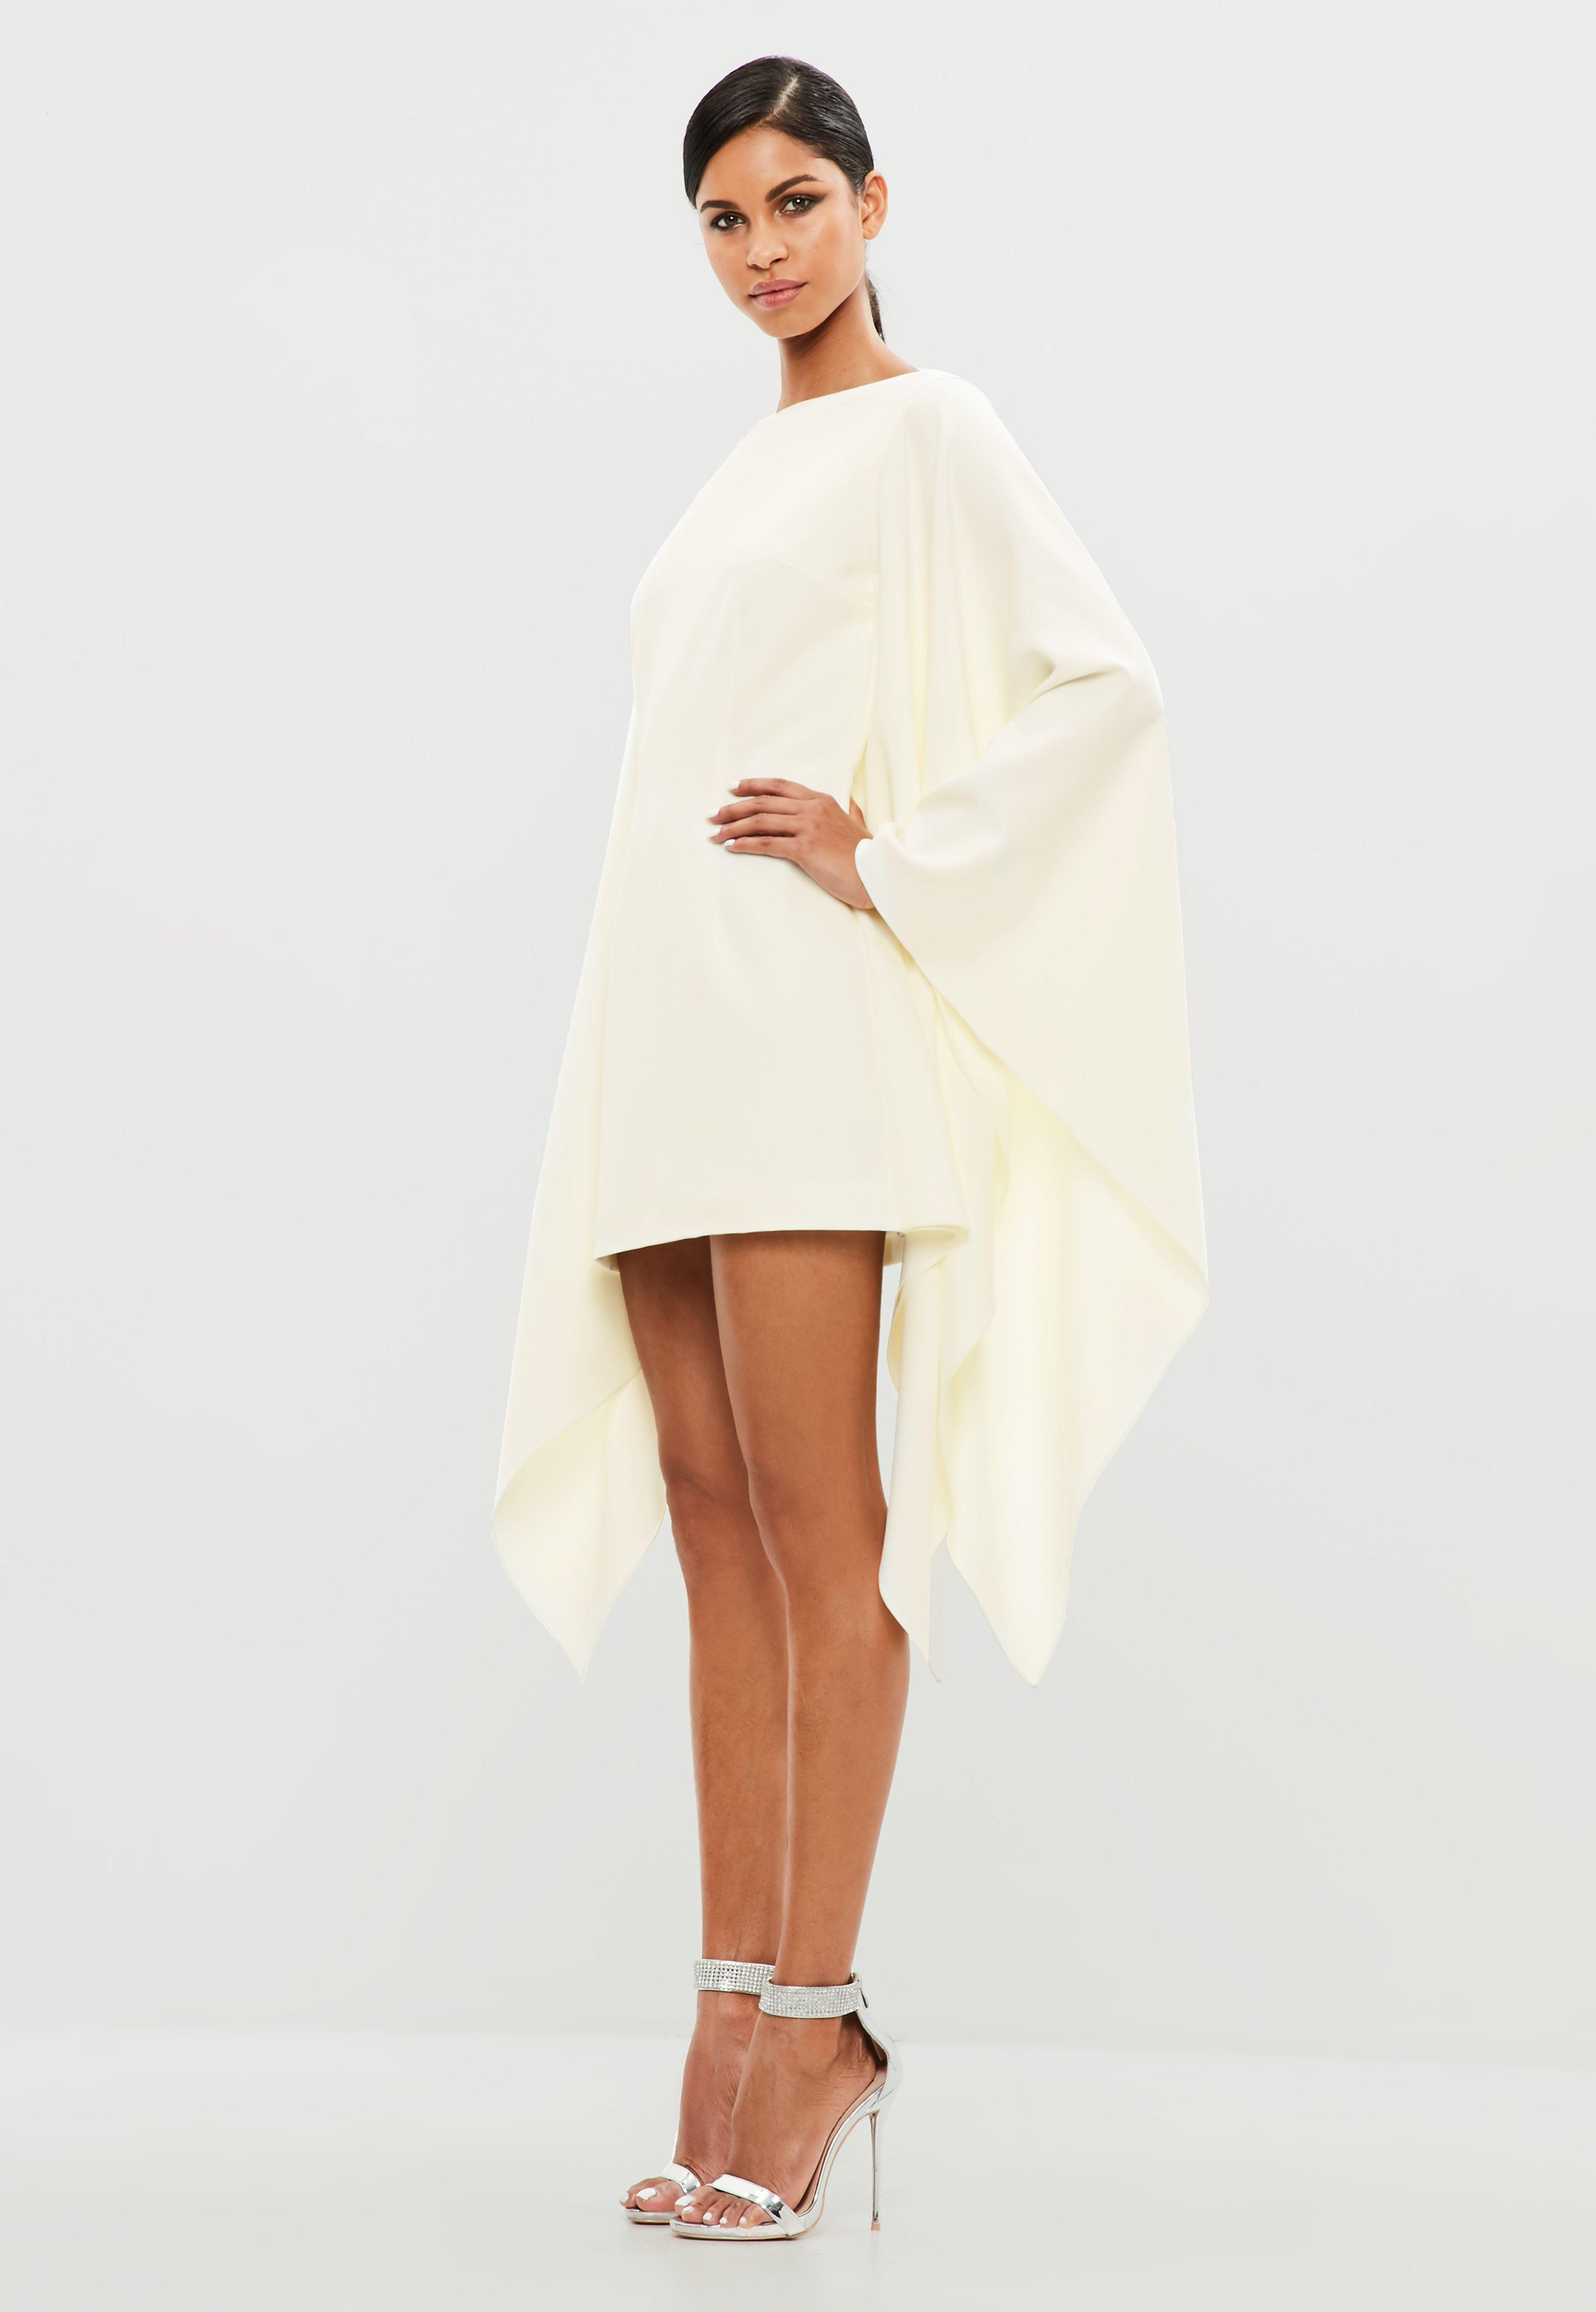 Lyst - Missguided Peace + Love White Kimono Style Dress in White